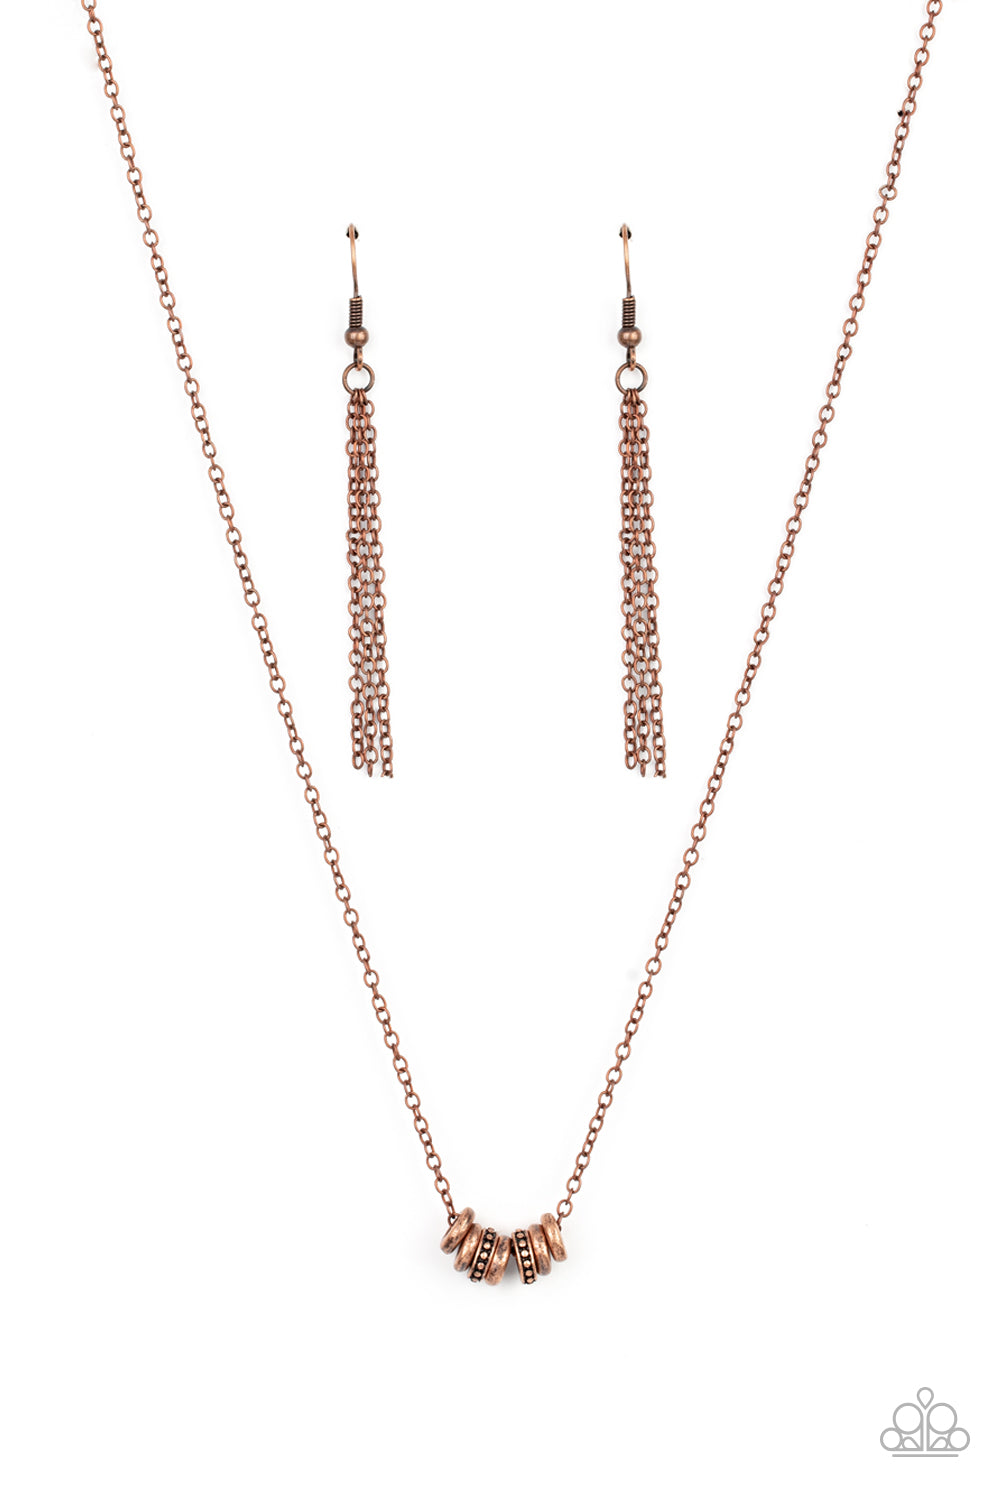 The Mane Ingredient - Copper Necklace - Paparazzi Accessories